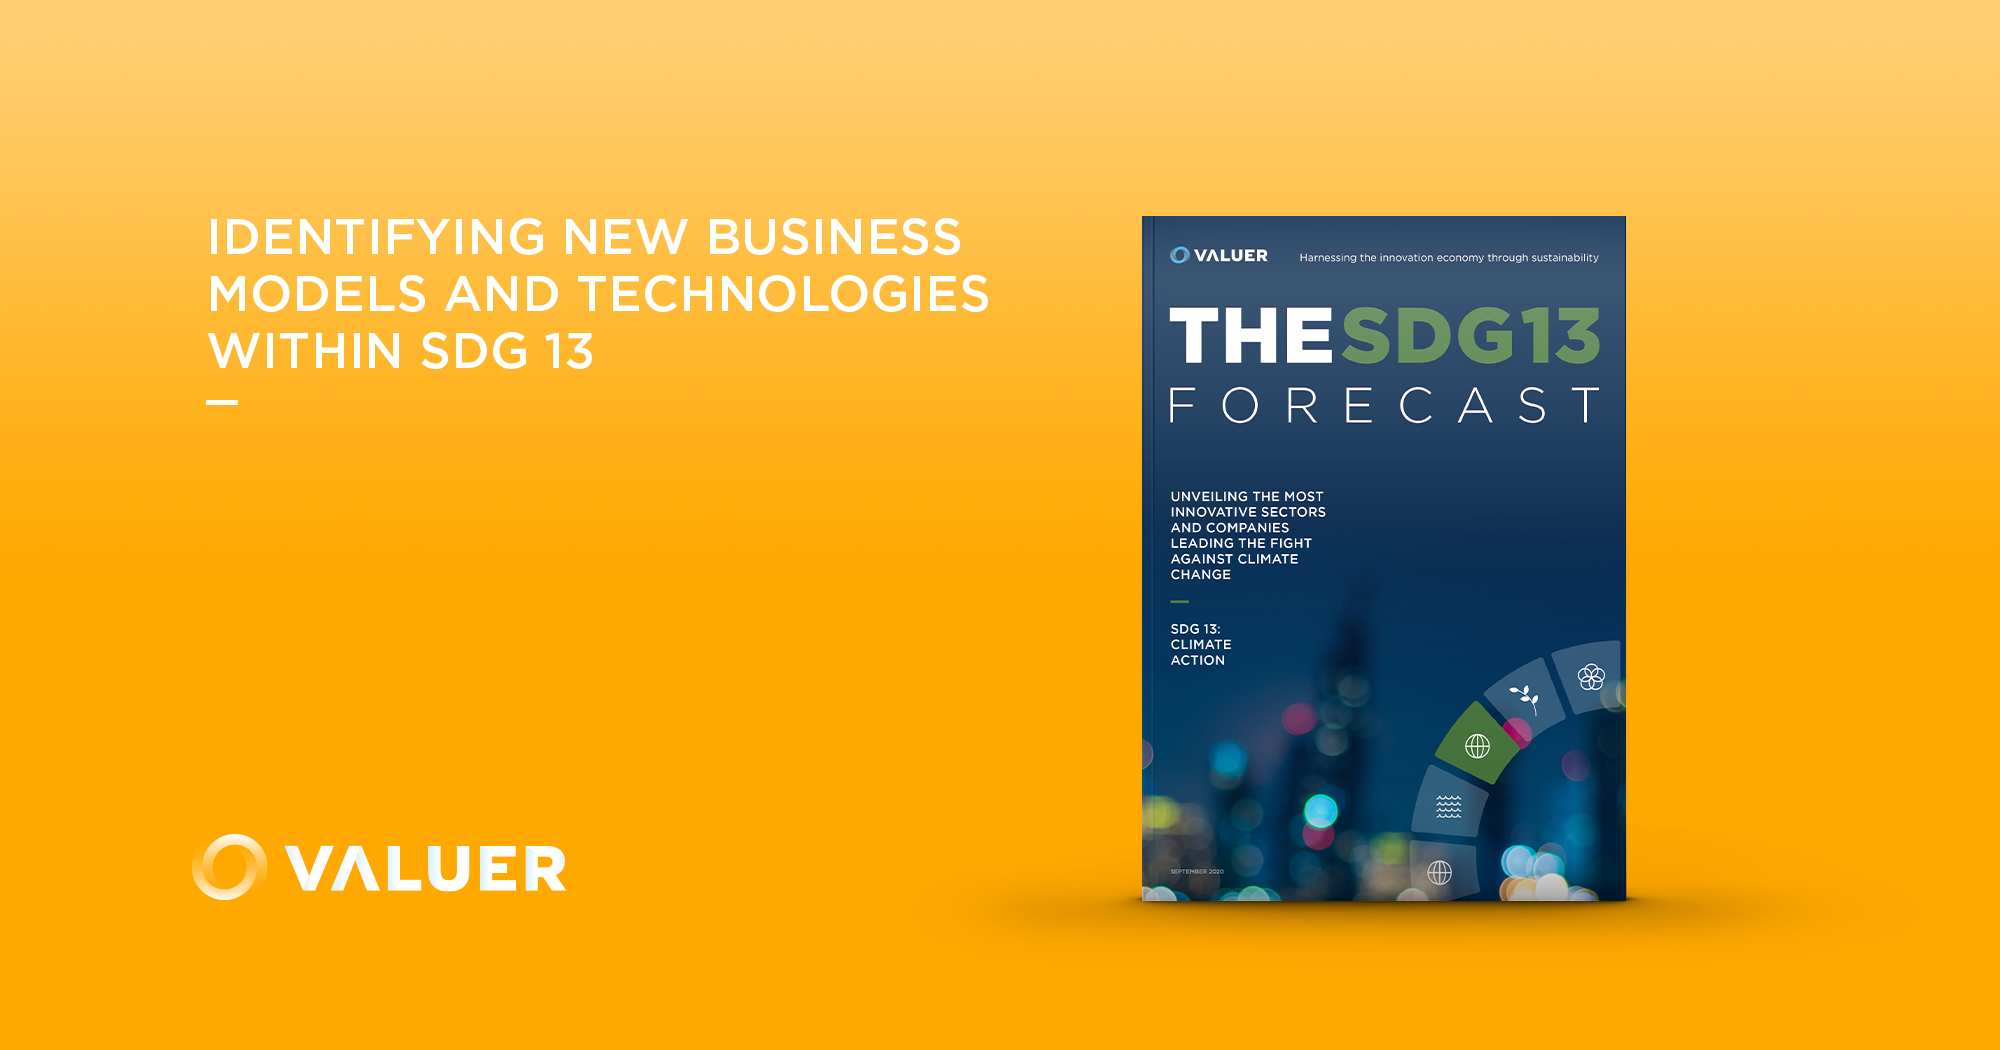 Innovative Companies and SDG 13: Climate Action (download report)